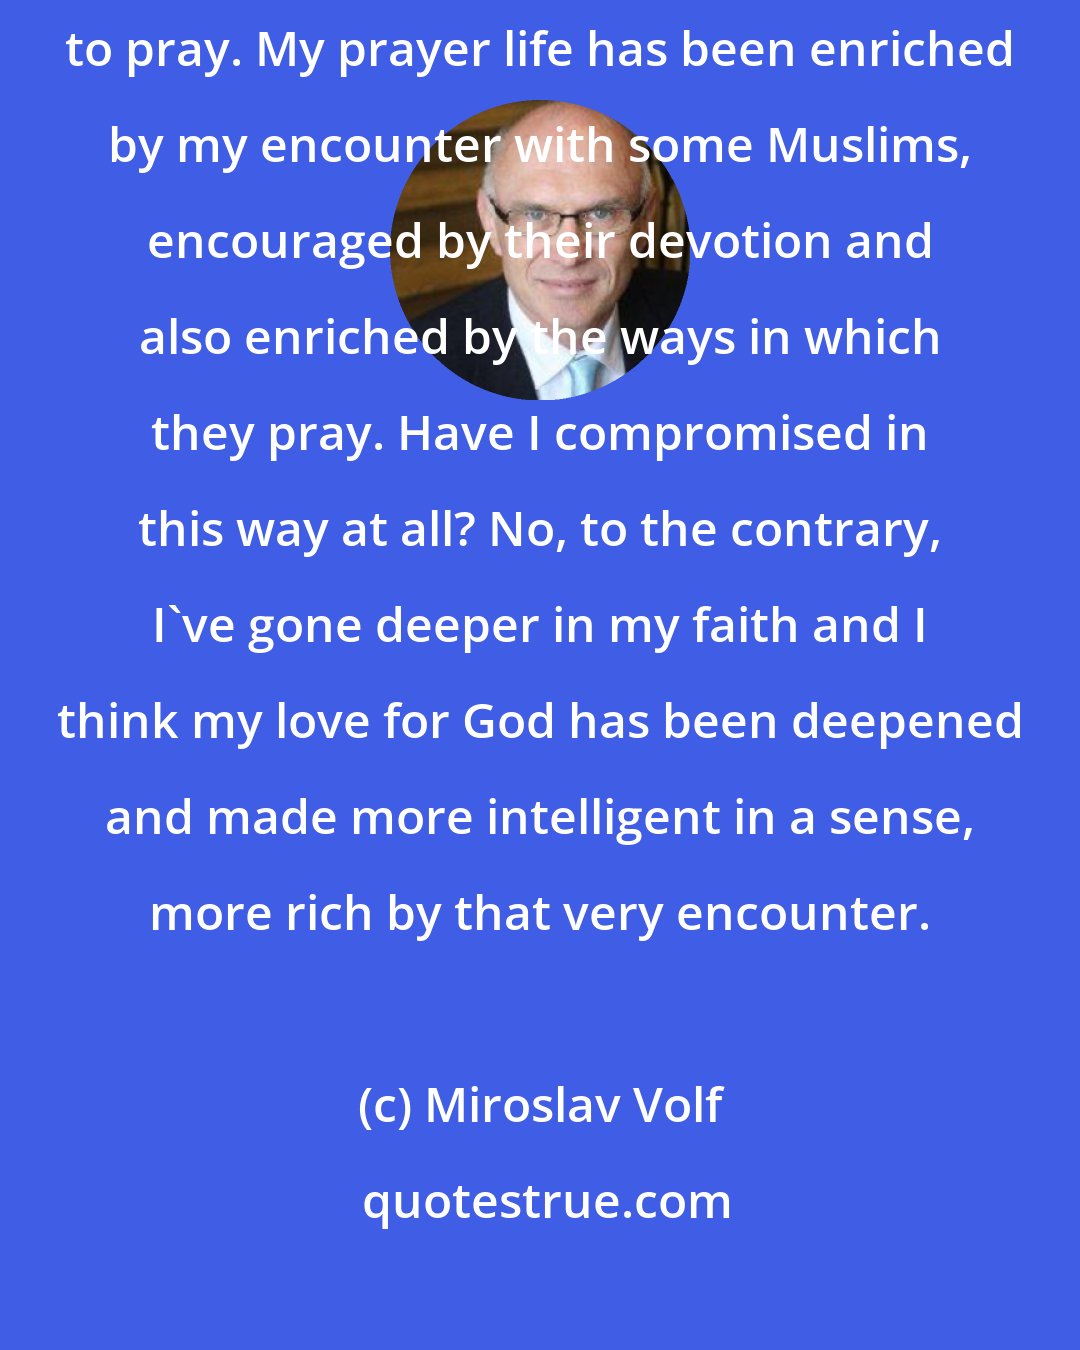 Miroslav Volf: After my engagement with Muslim friends, I pray more than I used to pray. My prayer life has been enriched by my encounter with some Muslims, encouraged by their devotion and also enriched by the ways in which they pray. Have I compromised in this way at all? No, to the contrary, I've gone deeper in my faith and I think my love for God has been deepened and made more intelligent in a sense, more rich by that very encounter.